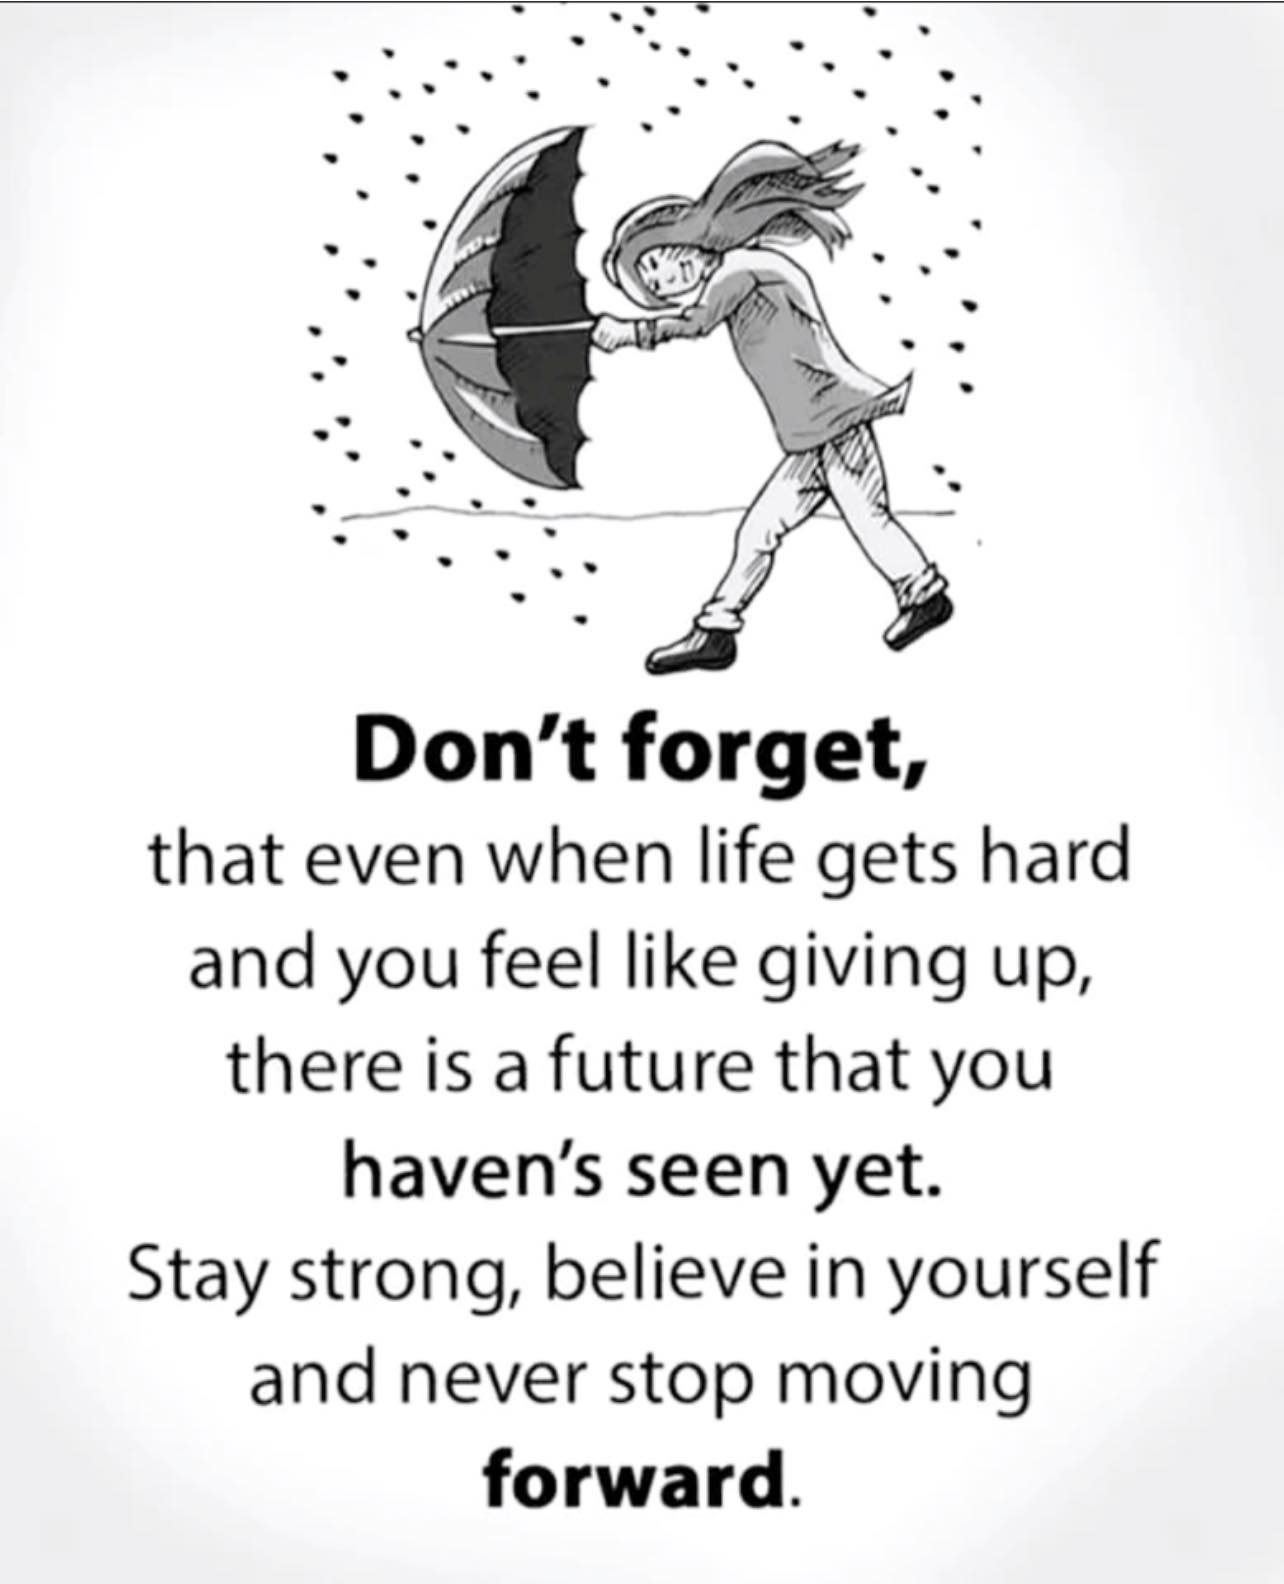 May be an image of text that says 'Don't forget, that even when life gets hard and you feel like giving up, there is a future that you haven's seen yet. Stay strong, believe in yourself and never stop moving forward.'